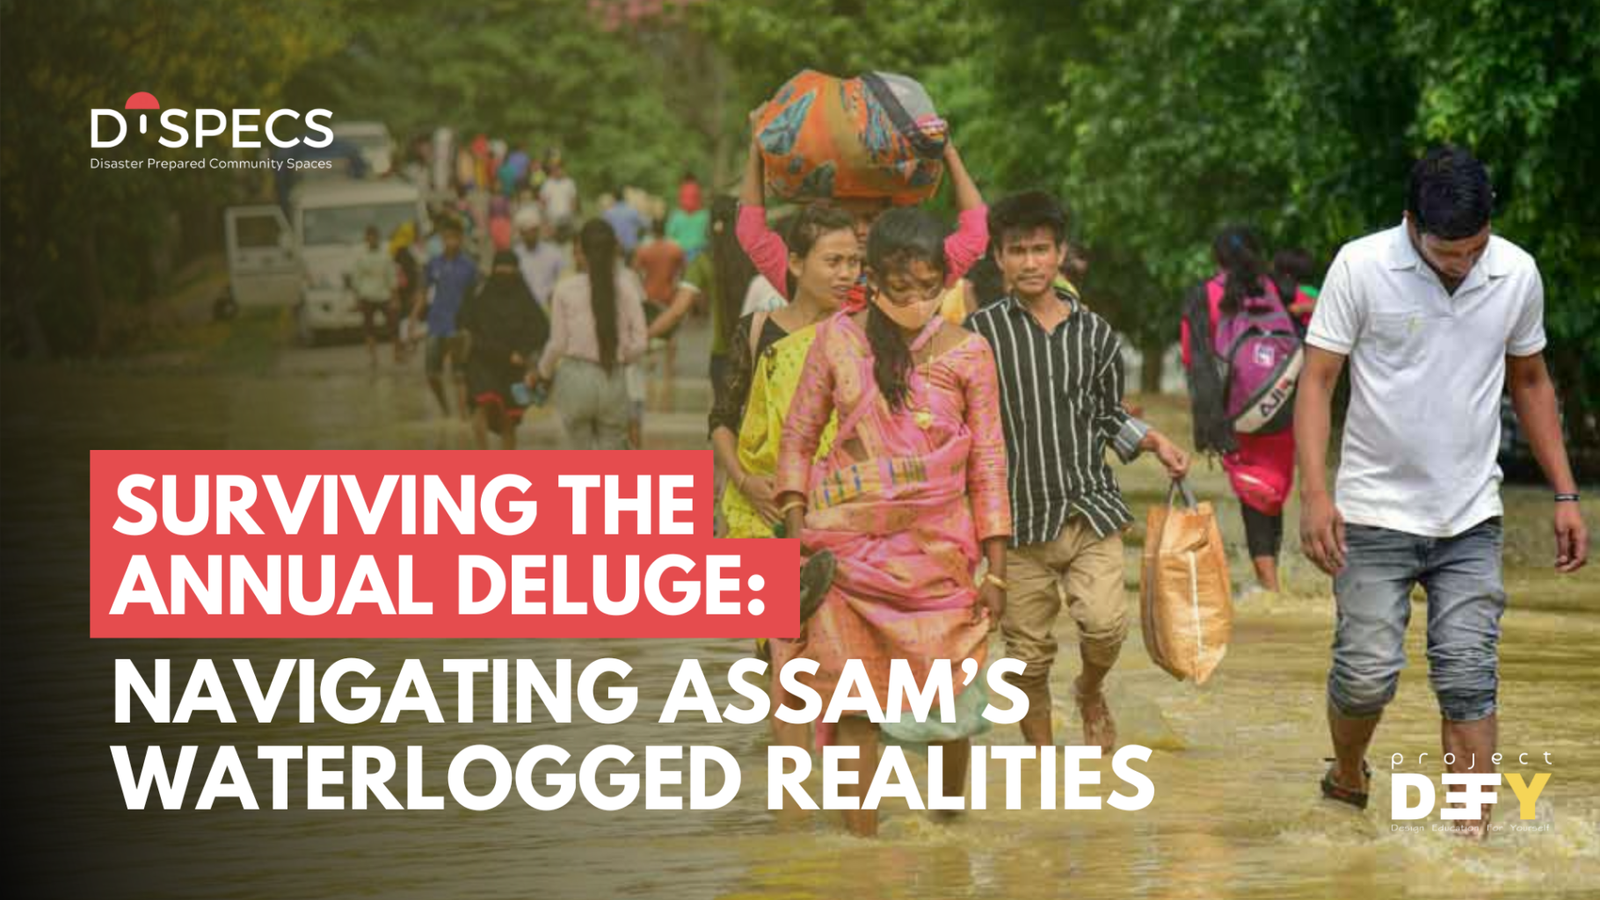 Surviving the Annual Deluge: Navigating Assam’s Waterlogged Realities